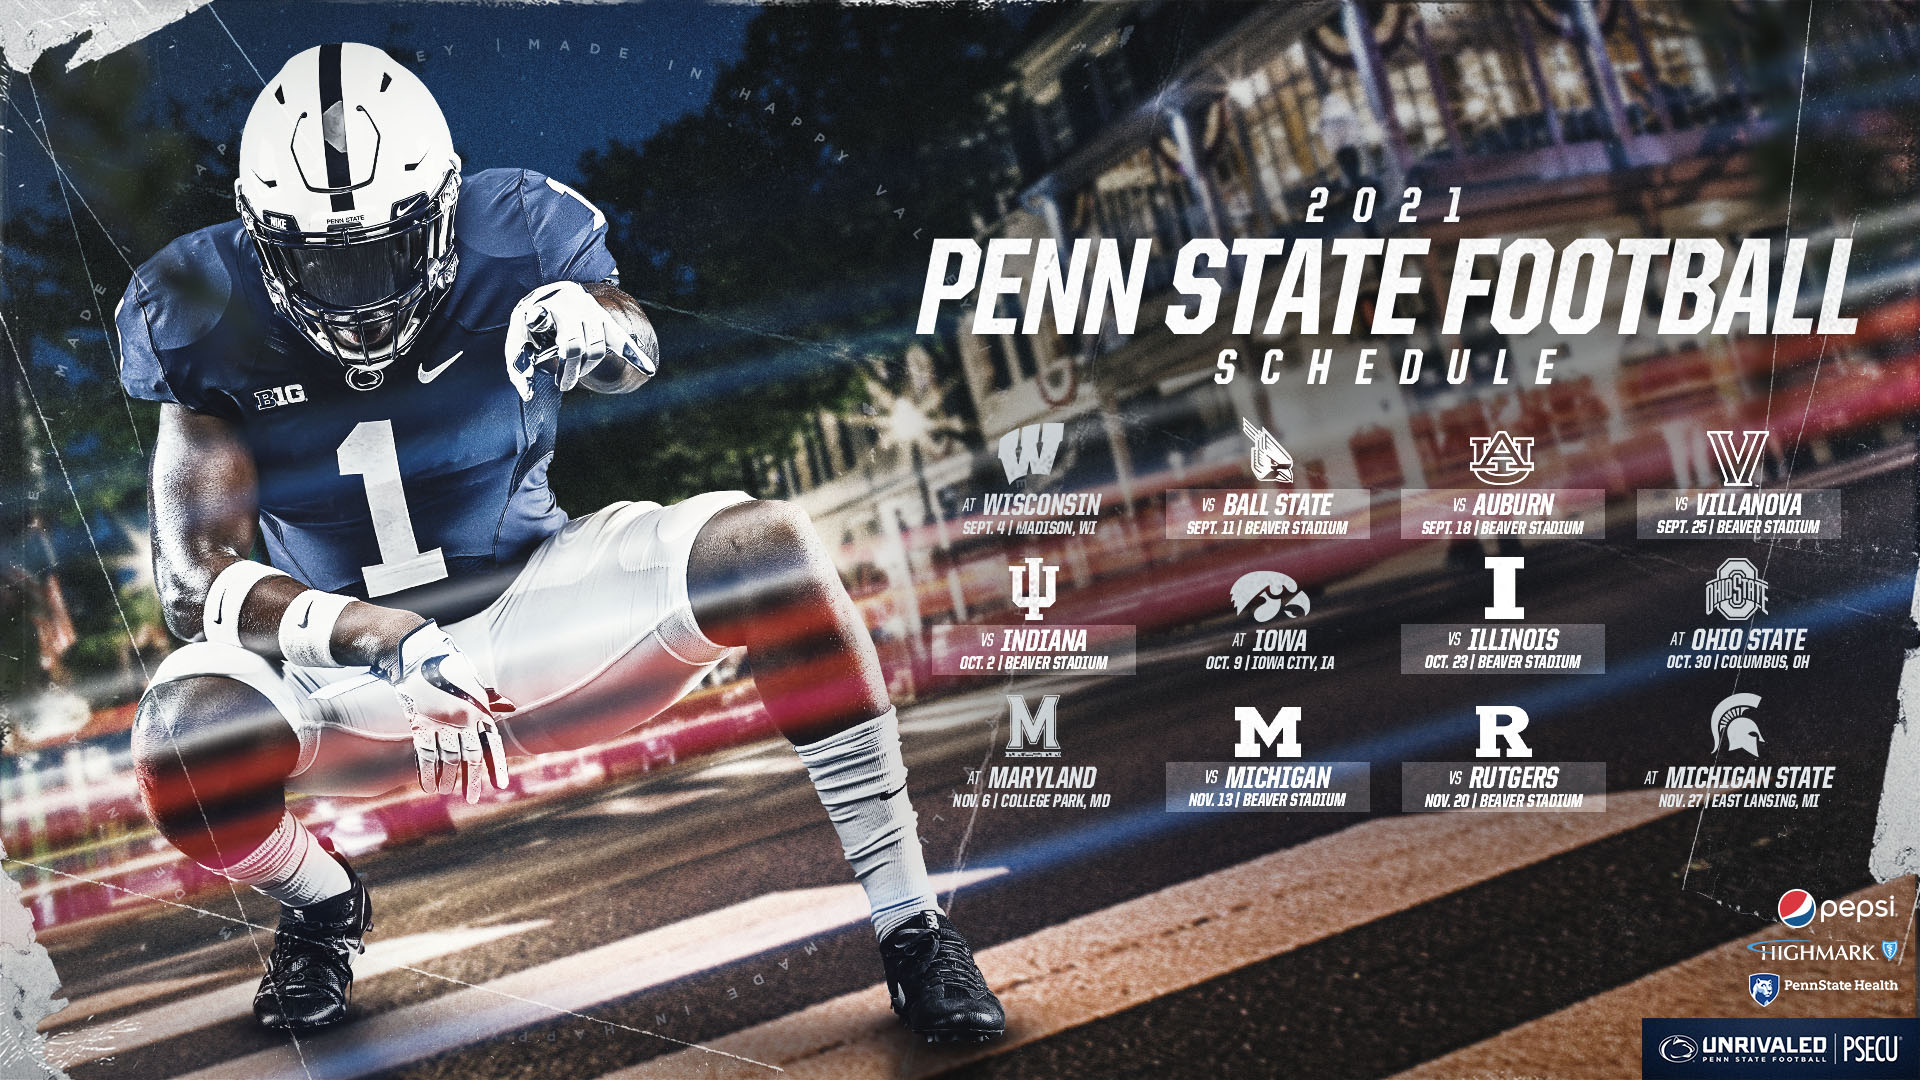 Penn State Wallpapers